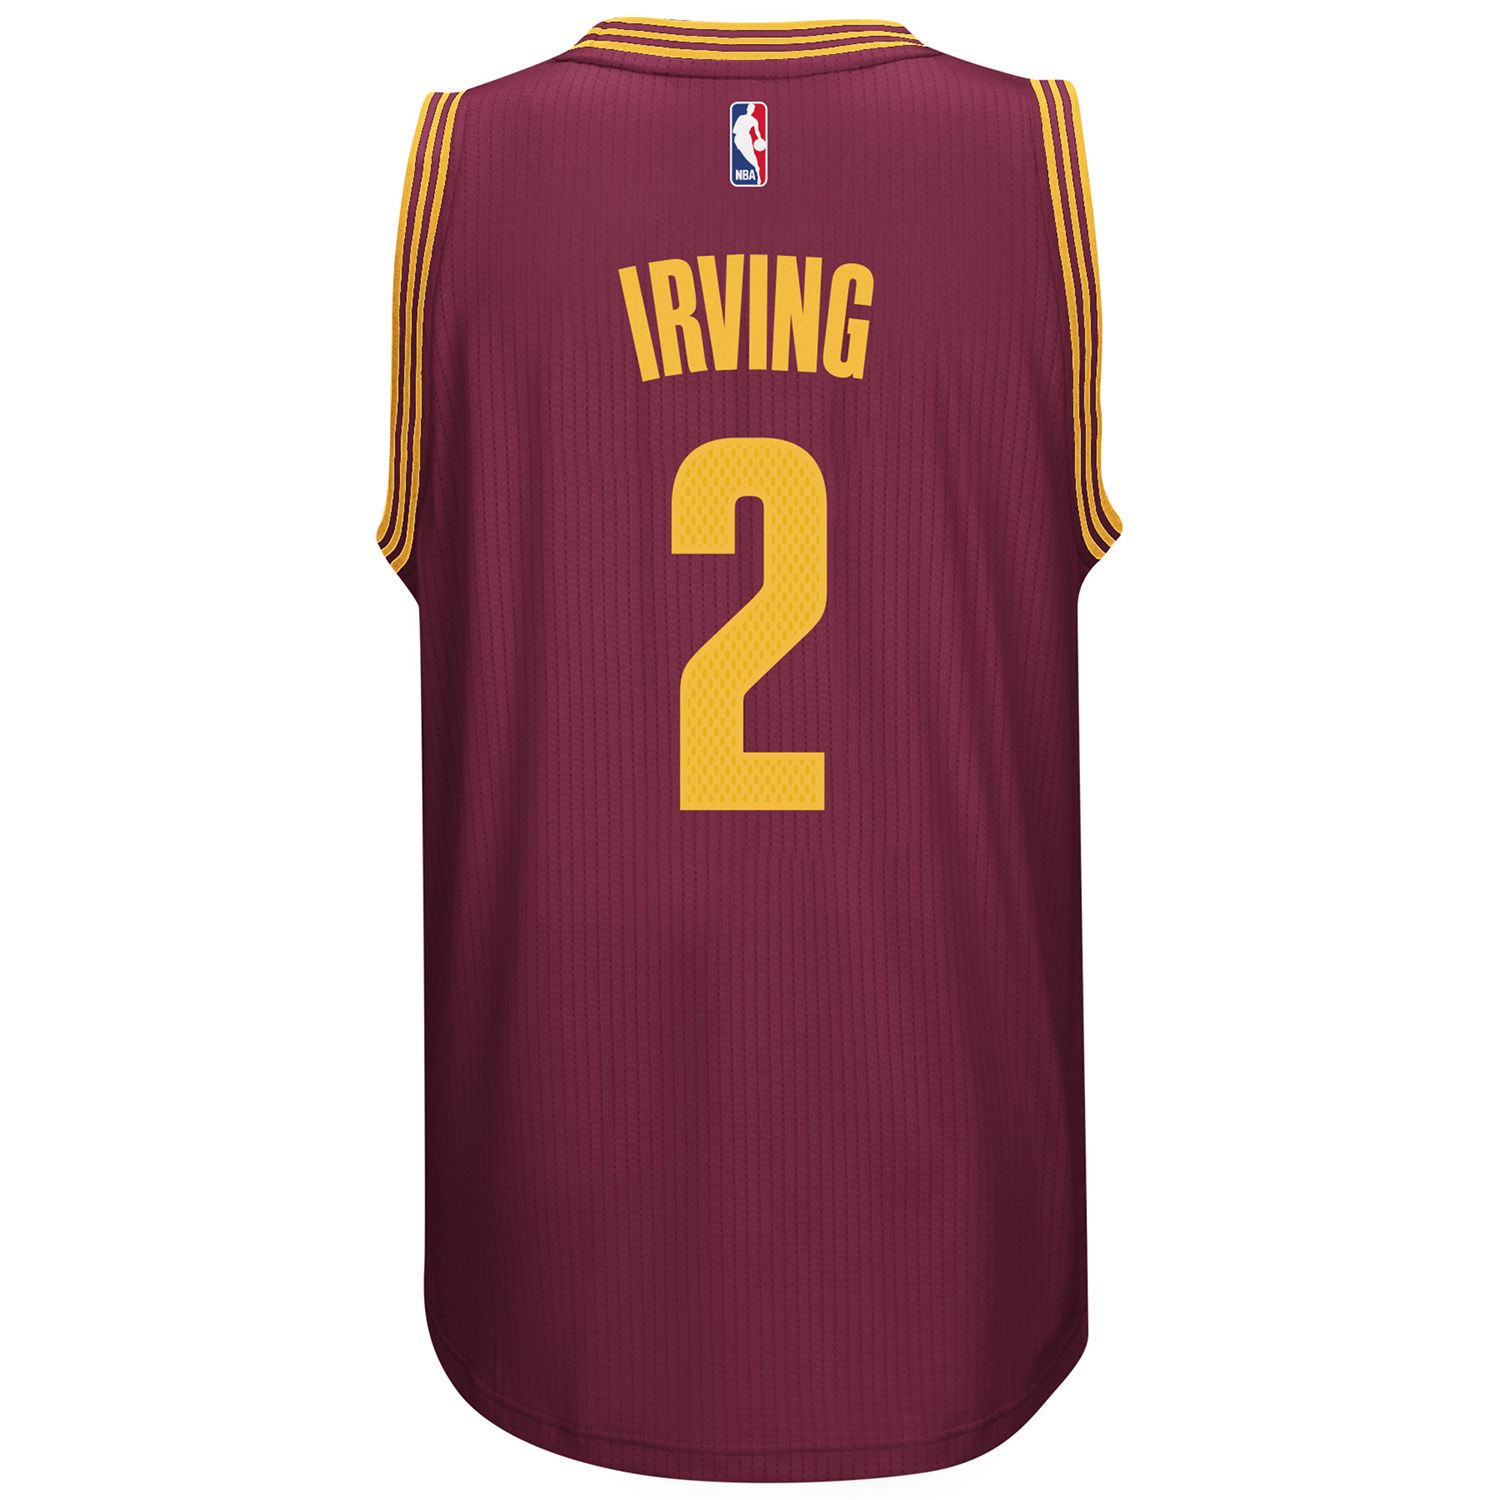 kyrie irving cleveland cavaliers jersey